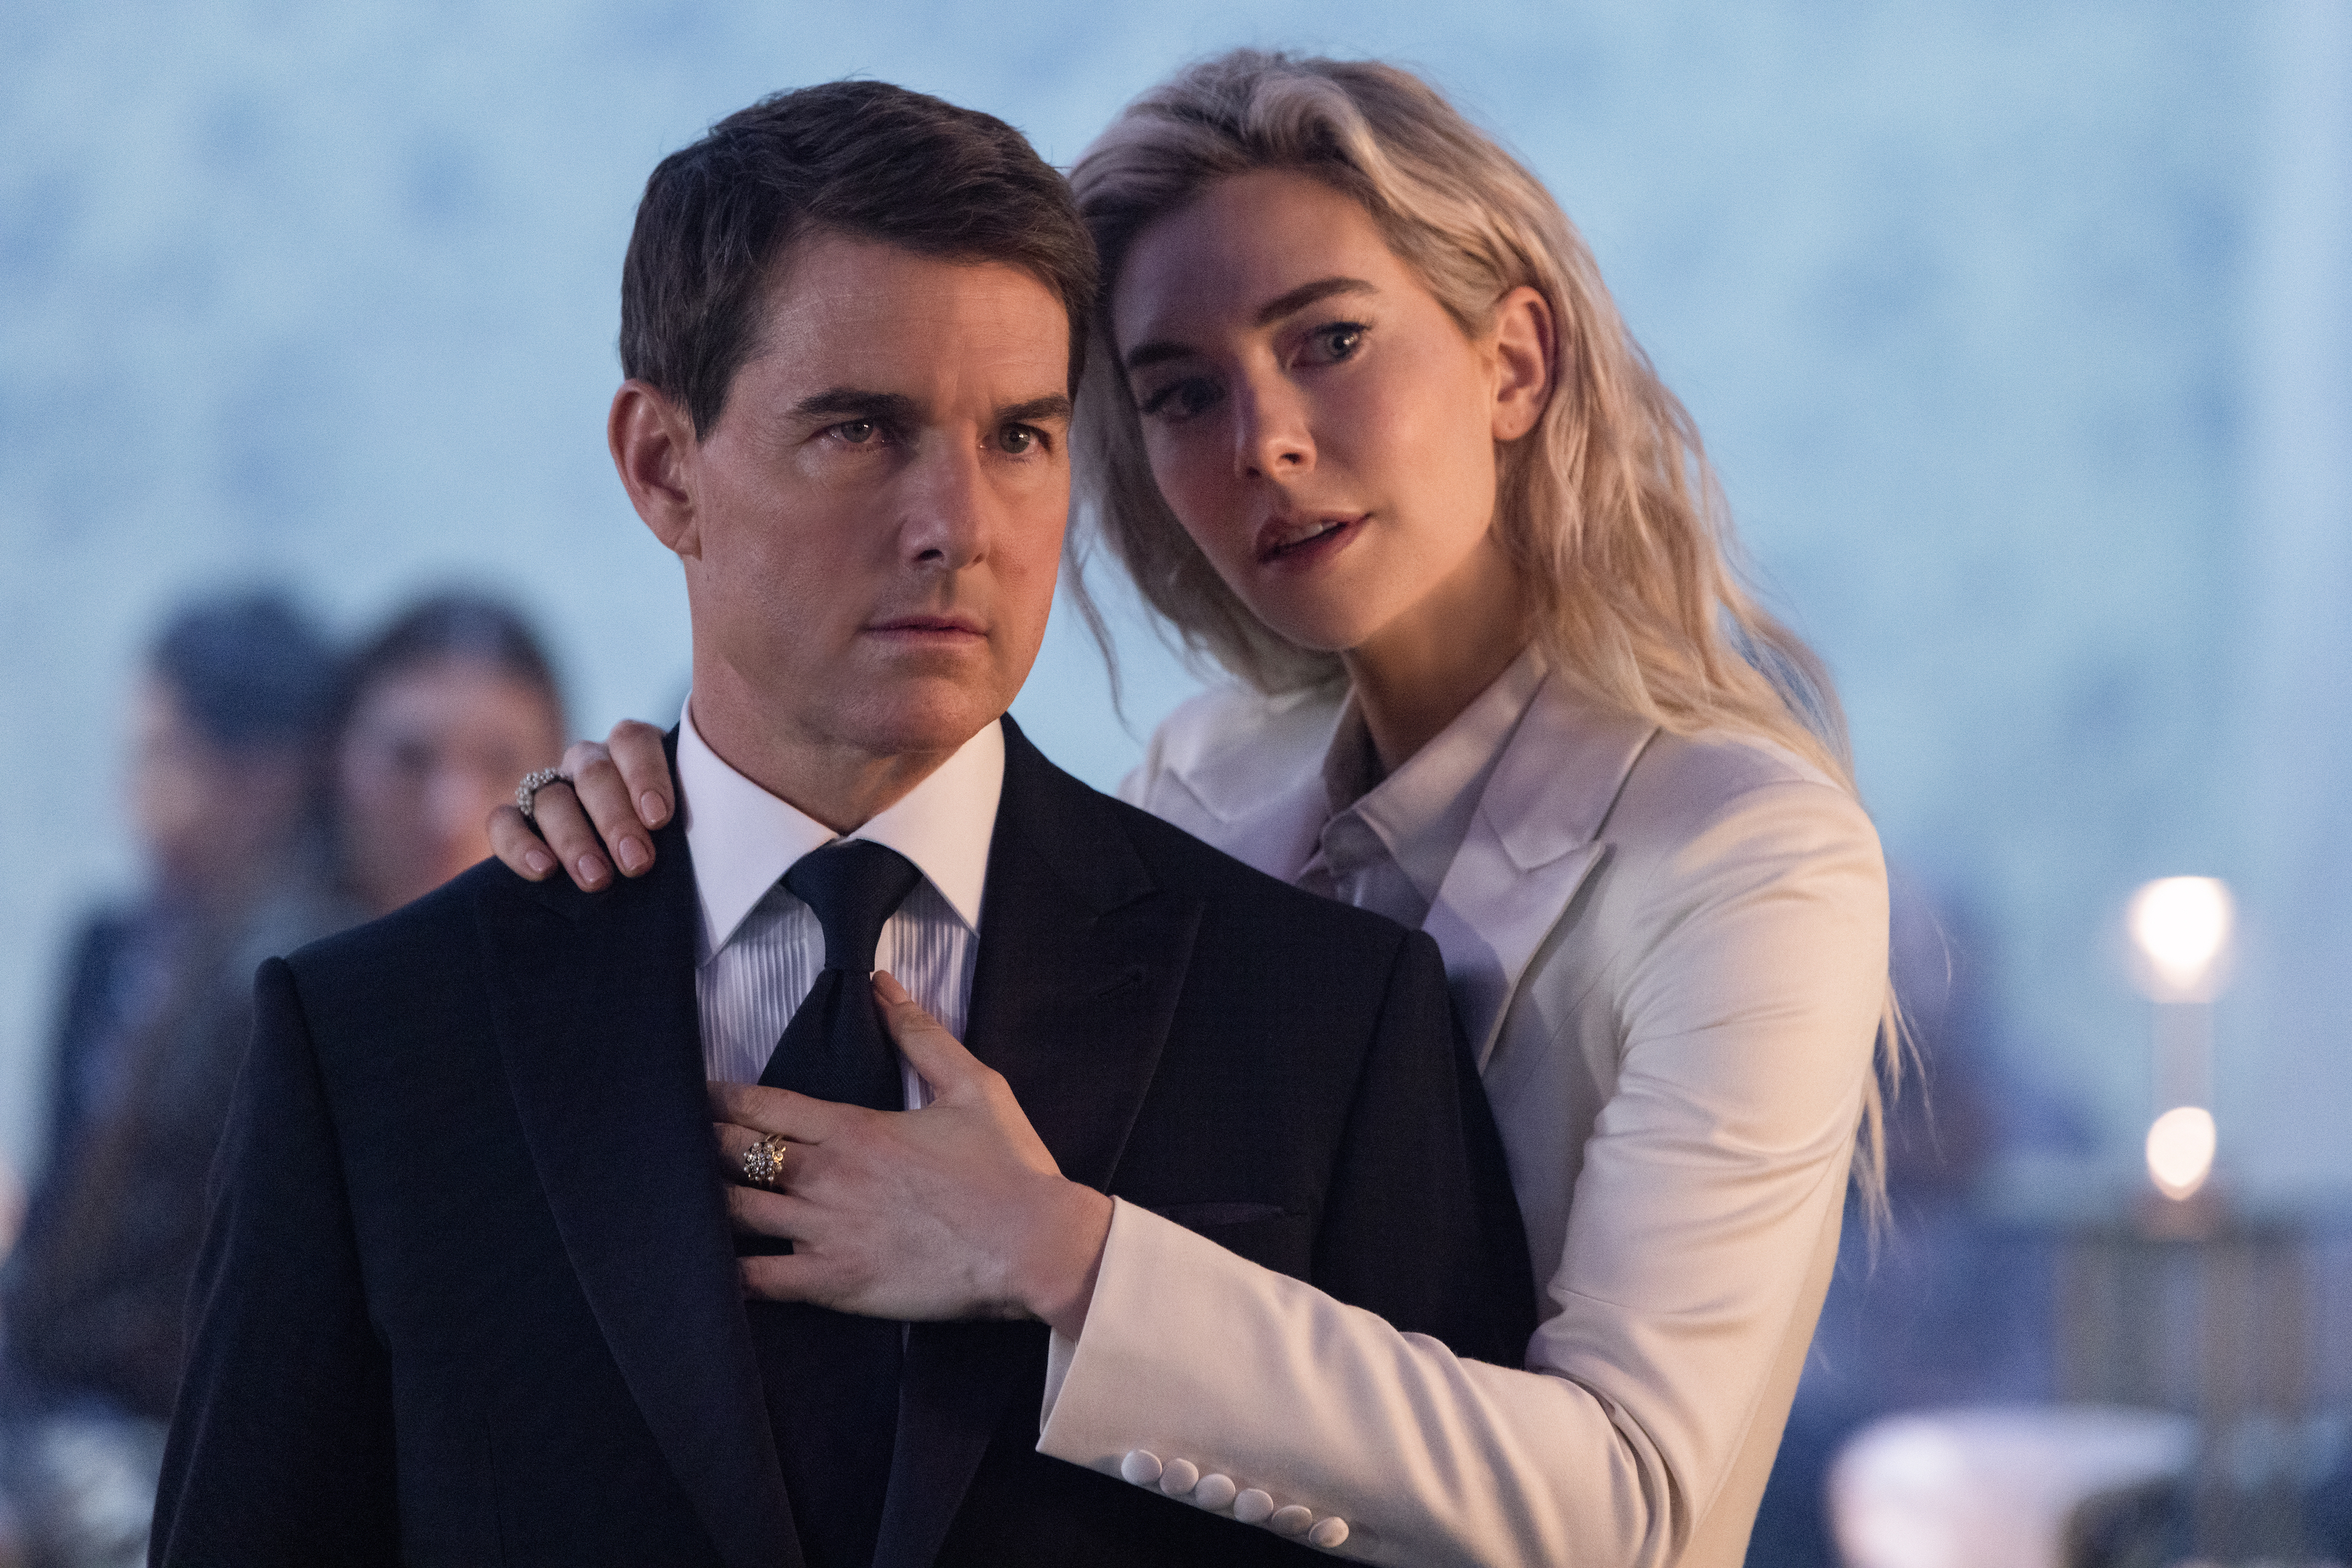 Ethan Hunt (Tom Cruise) looks particularly uncomfortable and dead-eyed wearing a suit and standing in a brightly backlit nightclub next to Alanna Mitsopolis, the White Widow (Vanessa Kirby), a blonde woman in white who’s all up in his personal space and playing with the knot on his necktie in Mission: Impossible – Dead Reckoning Part One